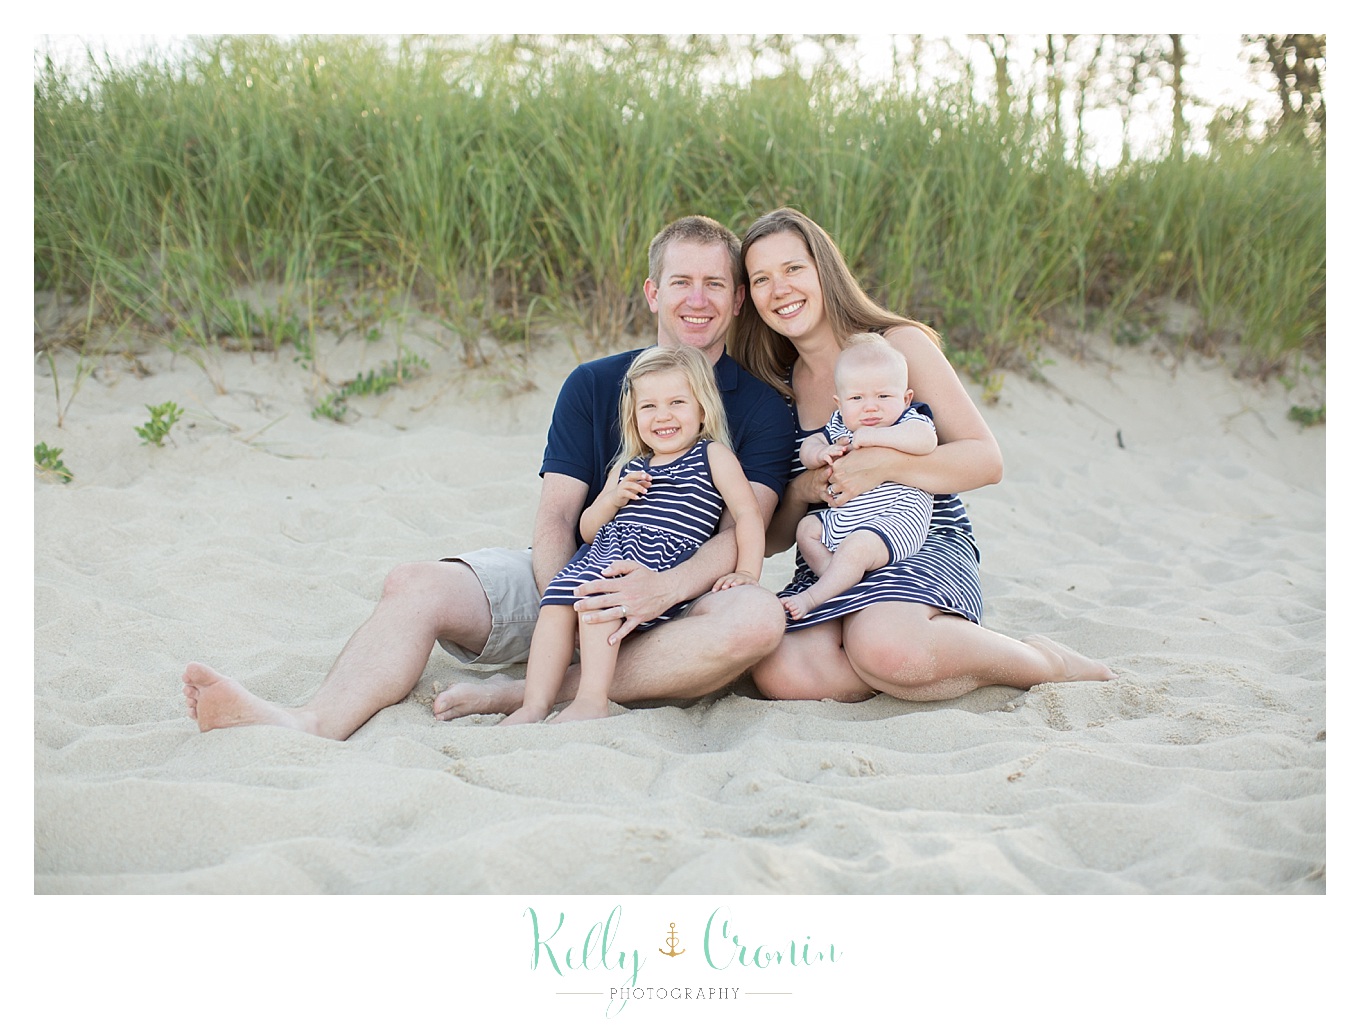 A family sits in the sand | Kelly Cronin Photography | Family Photography in Cape Cod